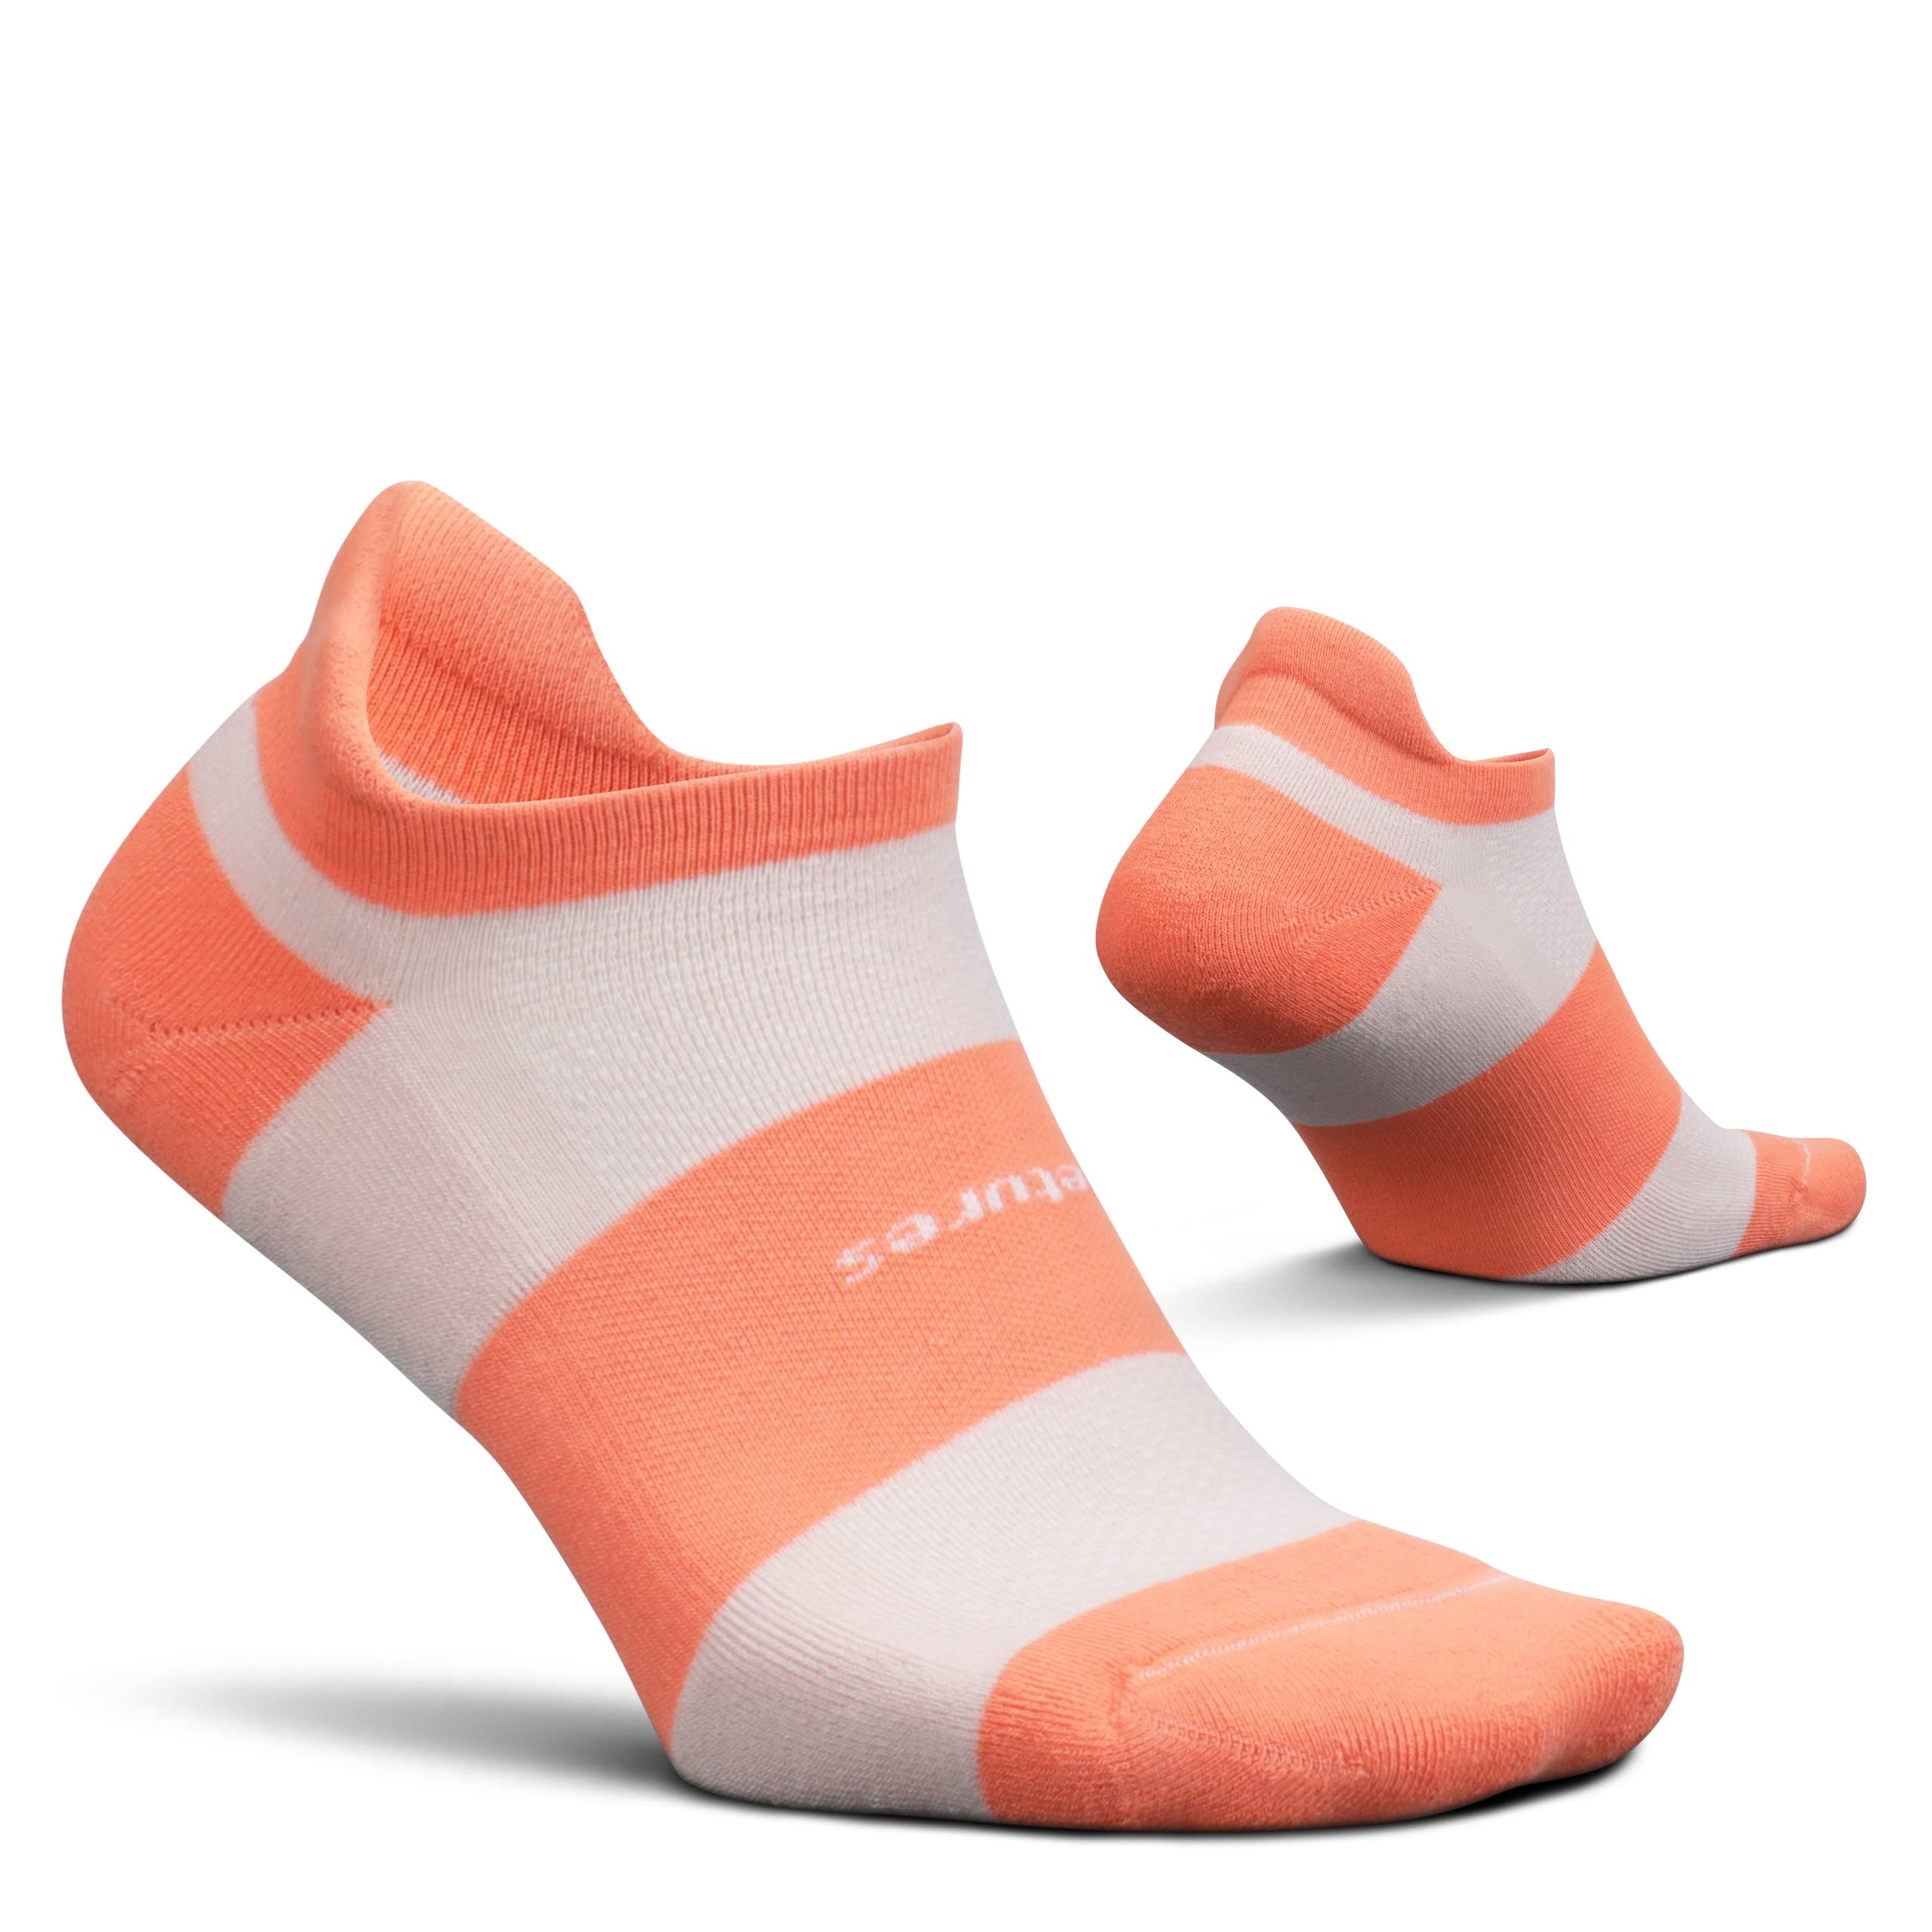 High Performance Cushion No Show Tab - Running Socks for Men and Women - Athletic Ankle Socks